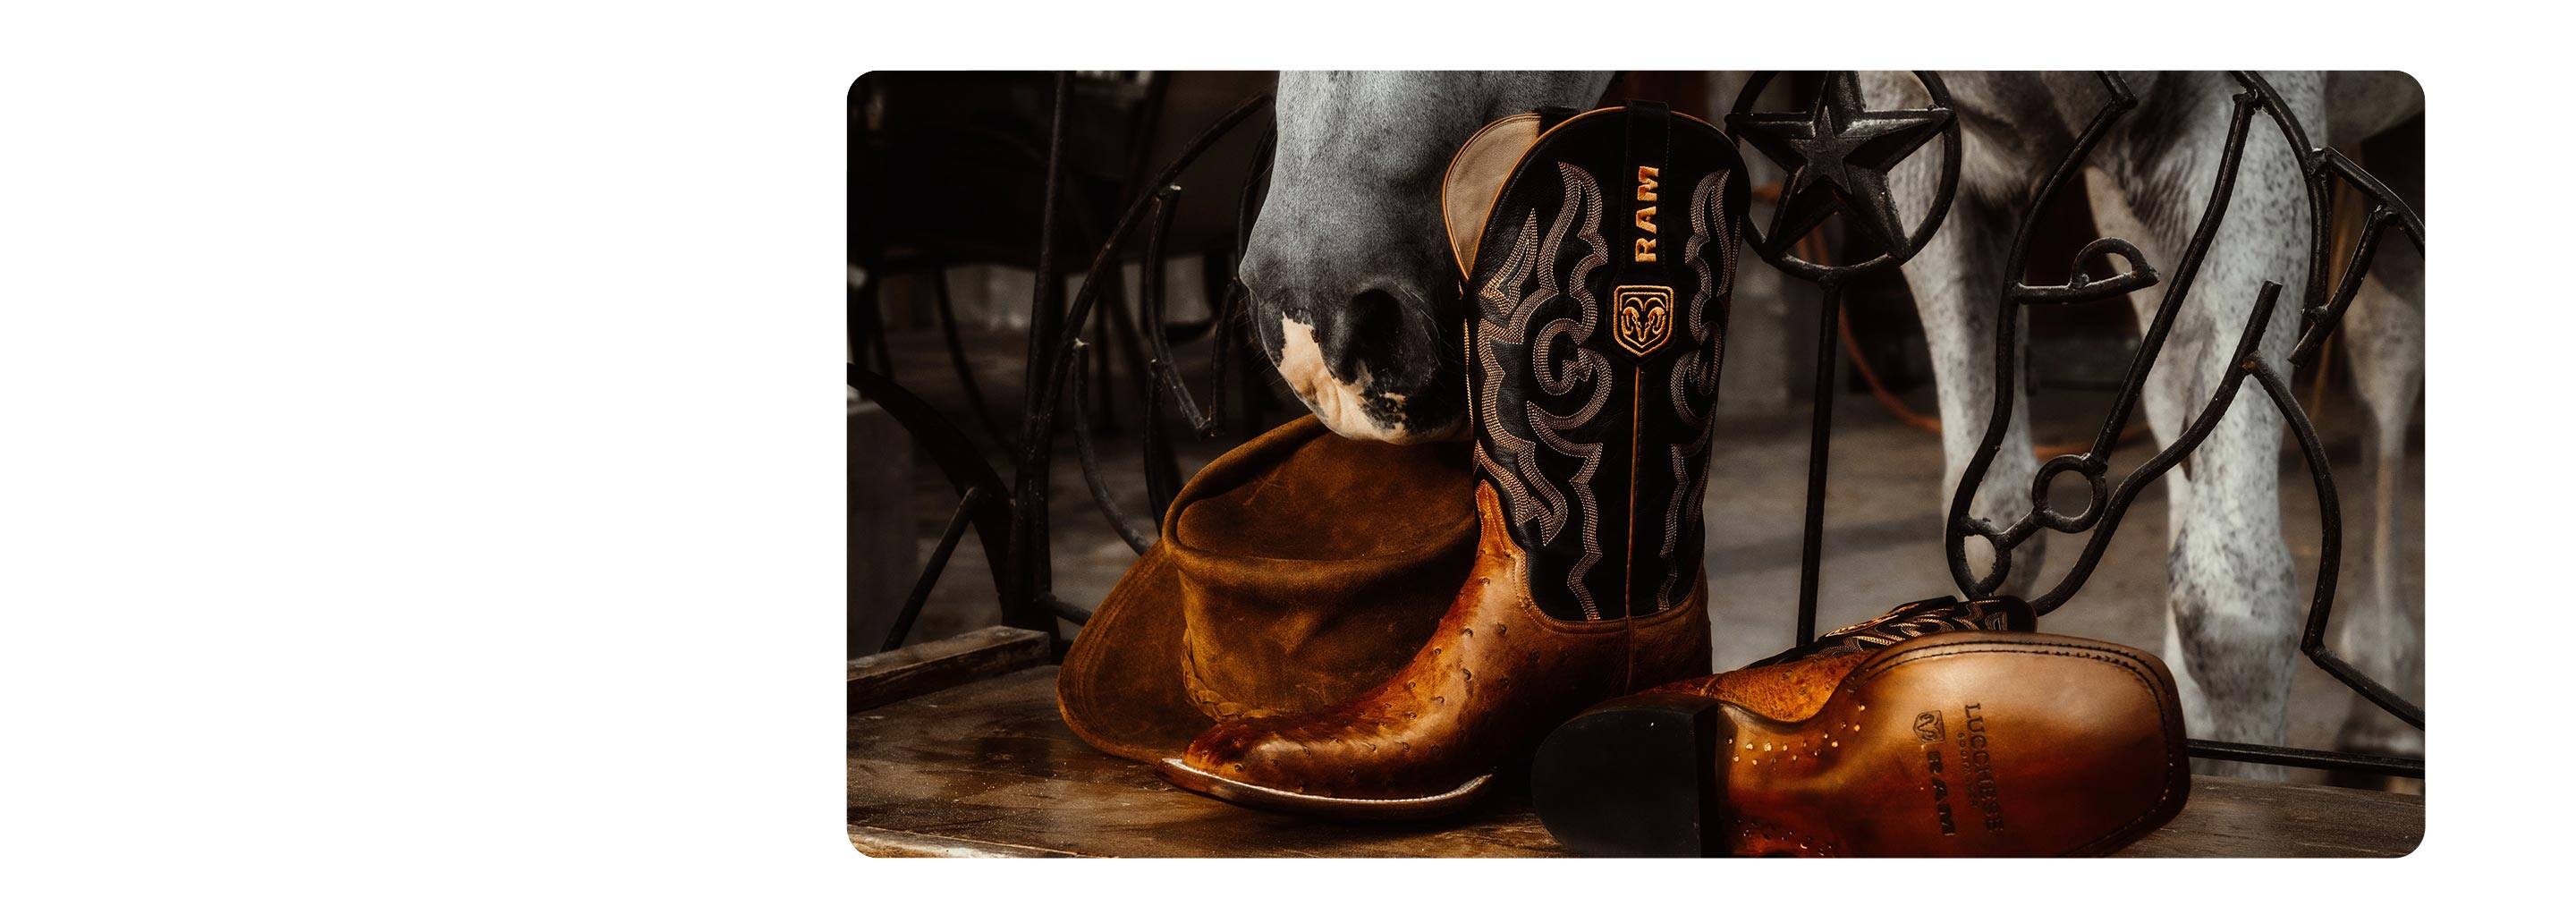 Close-up on an elaborately tooled leather cowboy boot, emblazoned with a Ram's Head logo and Ram brand mark.